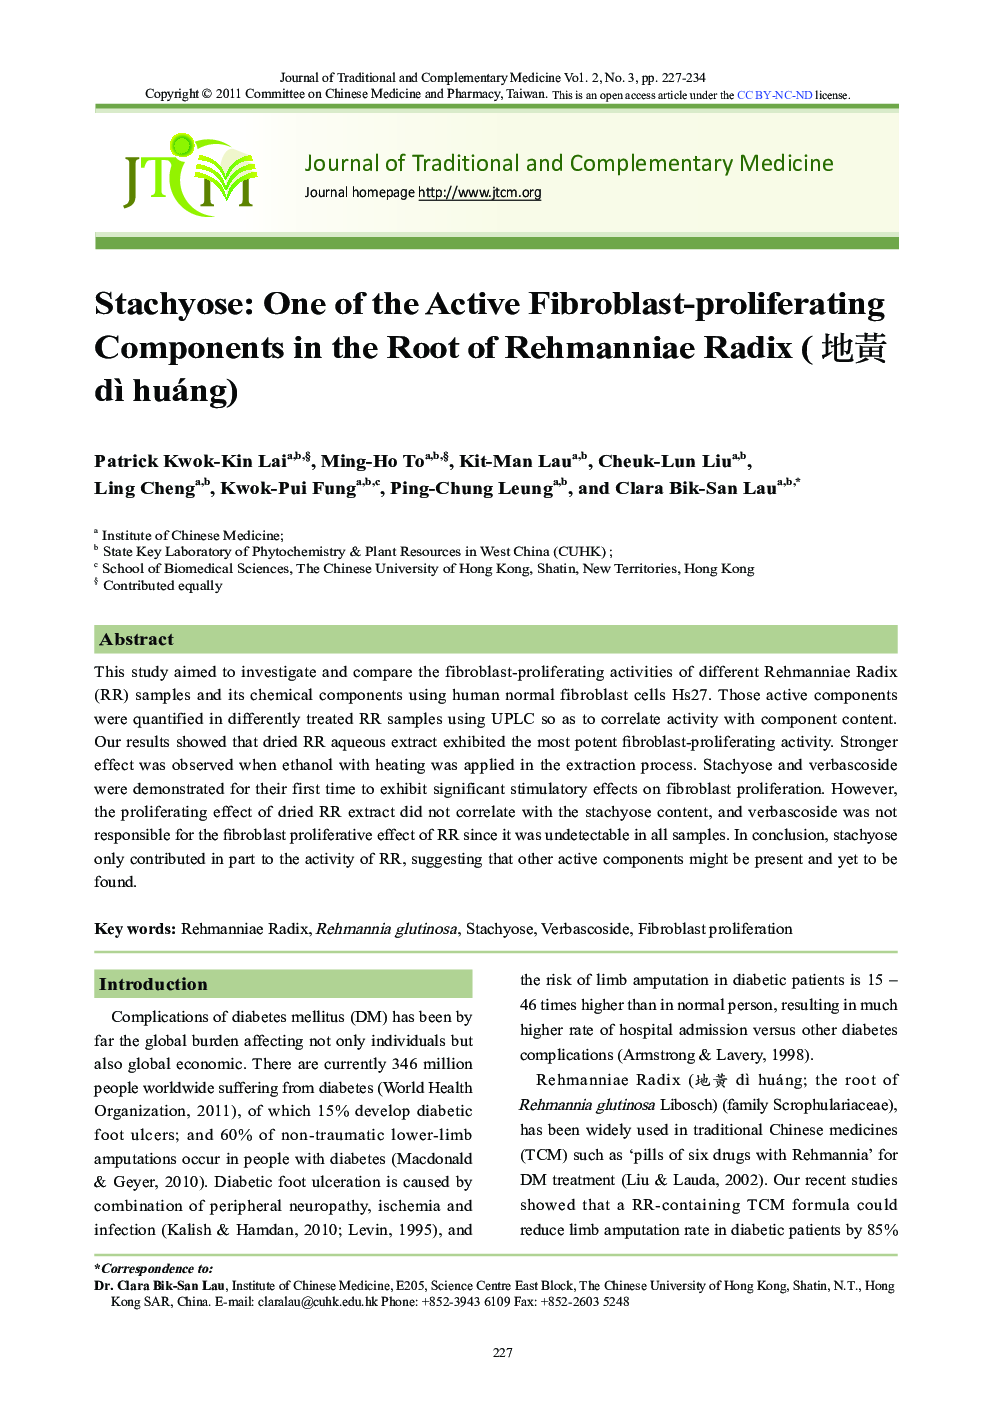 Stachyose: One of the Active Fibroblast-proliferating Components in the Root of Rehmanniae Radix (地黃 dì huáng)